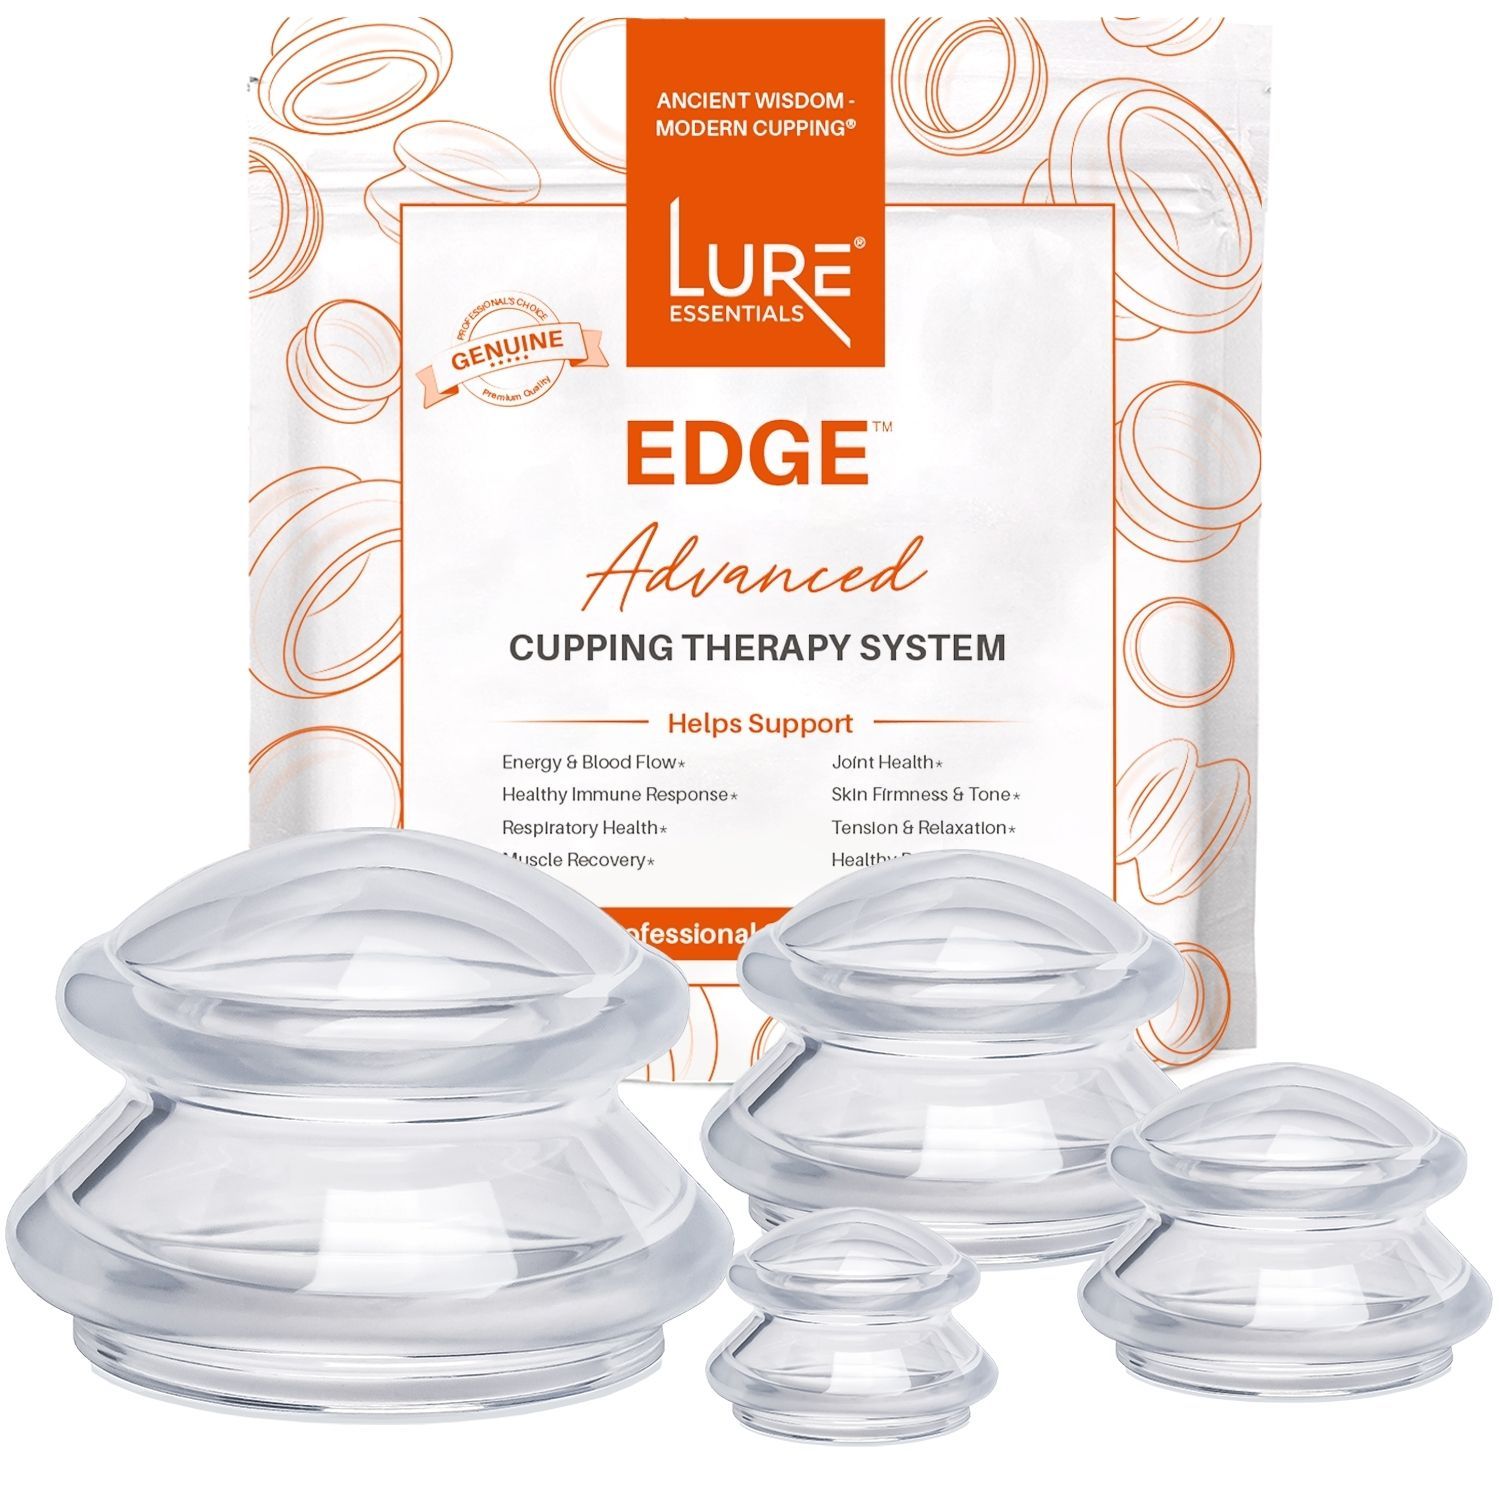 Lure Essentials Edge Cupping Therapy Set - Cupping Kit for Massage Therapy - Silicone Cupping Set - Massage Cups for Cupping Therapy, (8 Cups - 2L, 2m